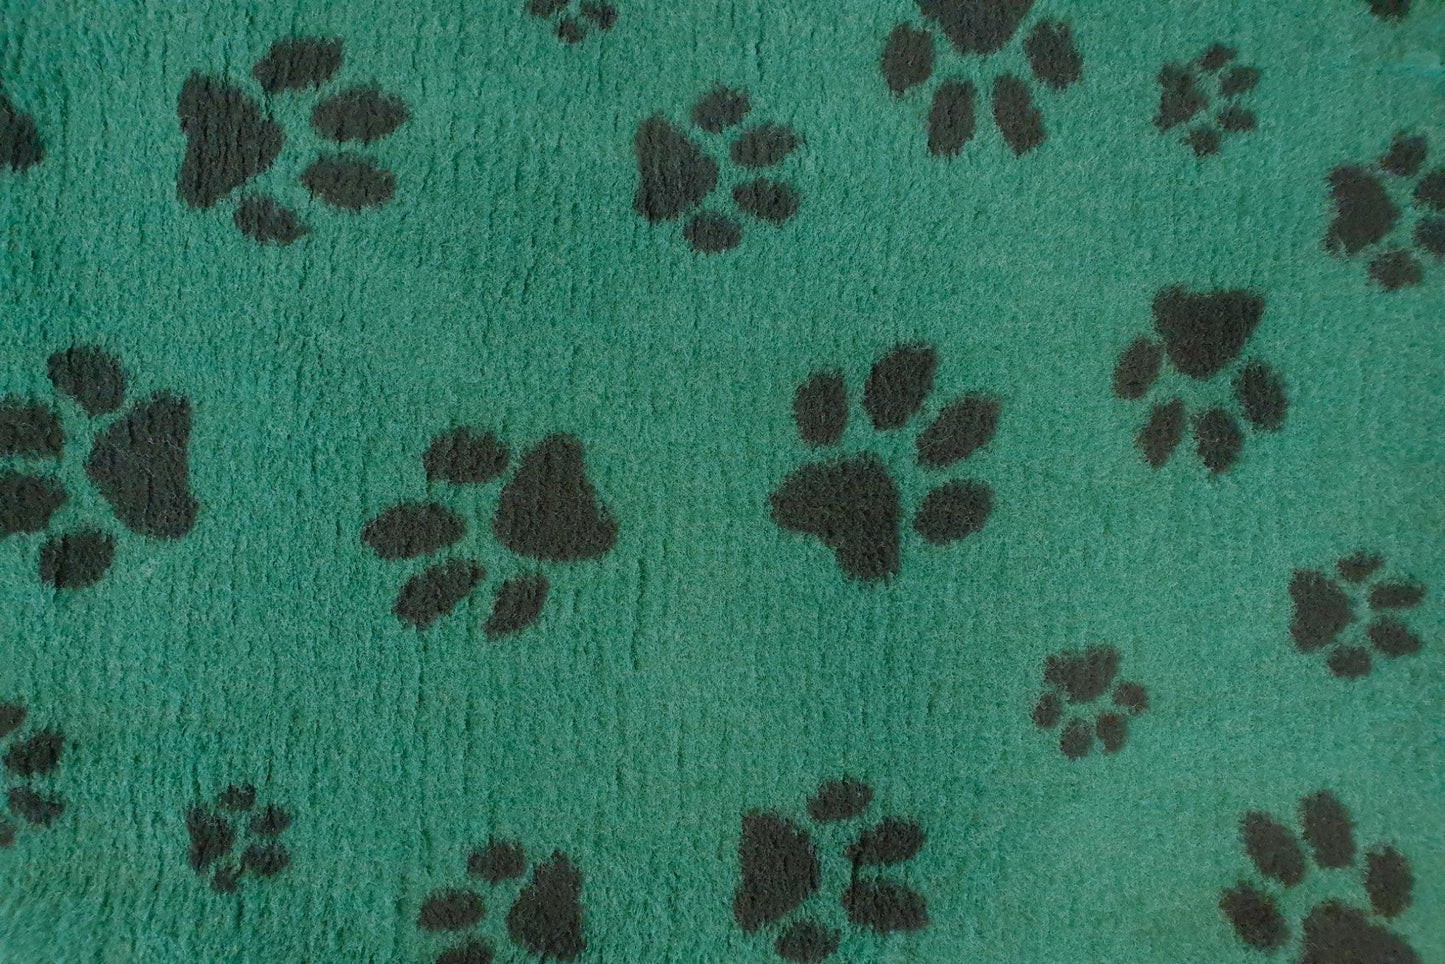 Vet Bed - Rubber Backed - Green with Black Designer Paws